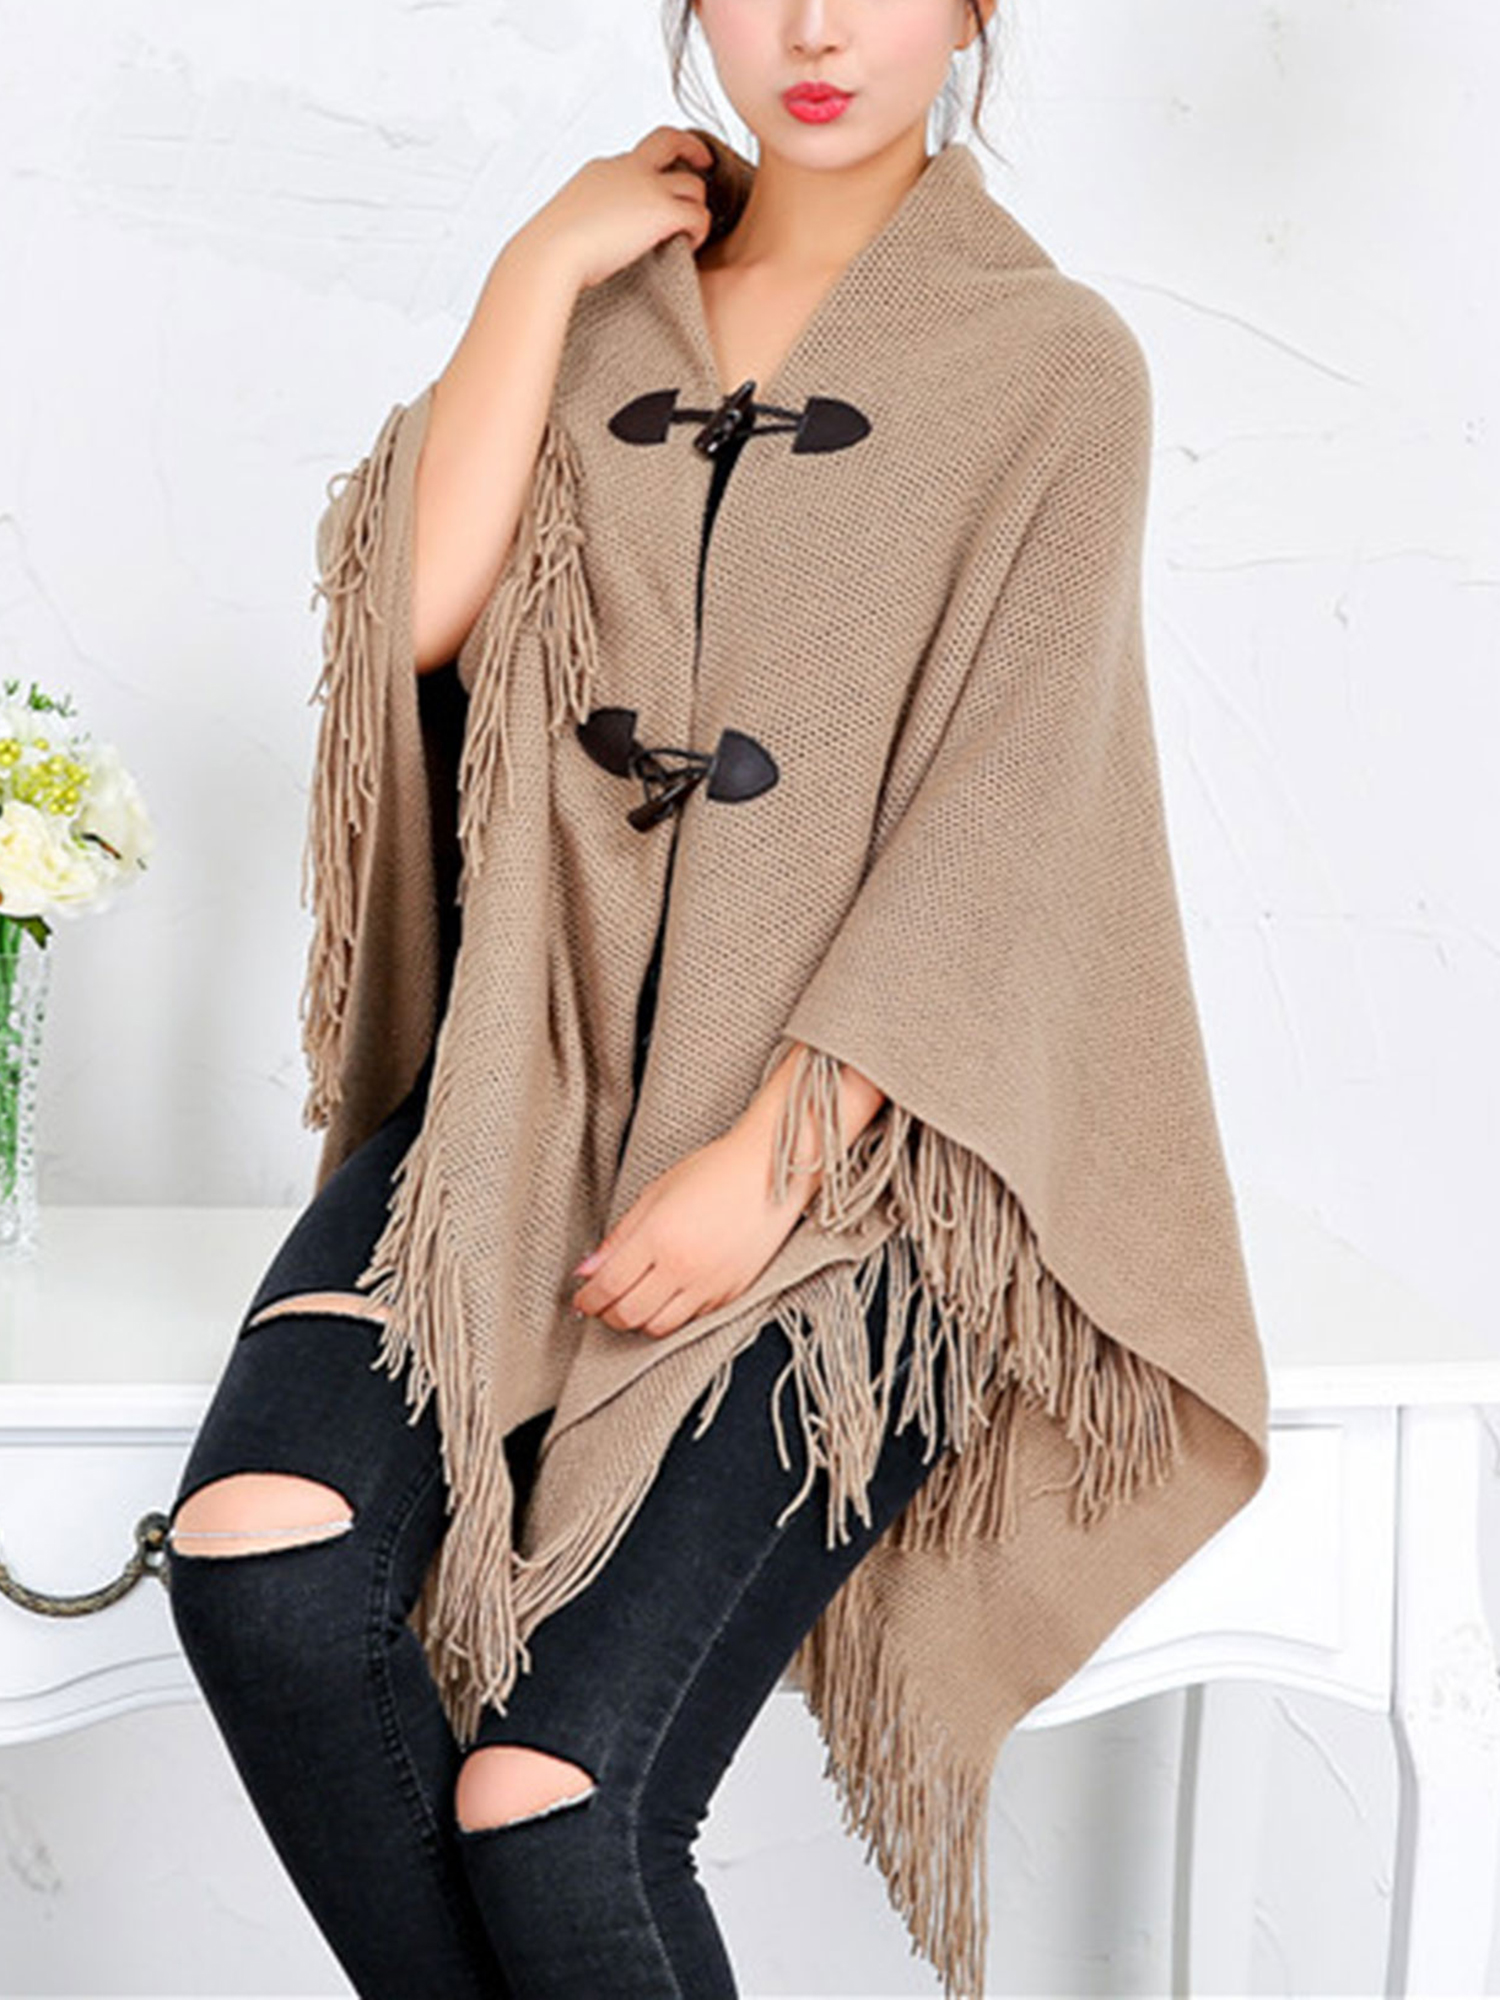 Poncho Sweater Women Oversized Horn Buttons Knit Poncho Cape Coat Cardigan Shawl Tassel Wrap Sweater for Women - image 1 of 7